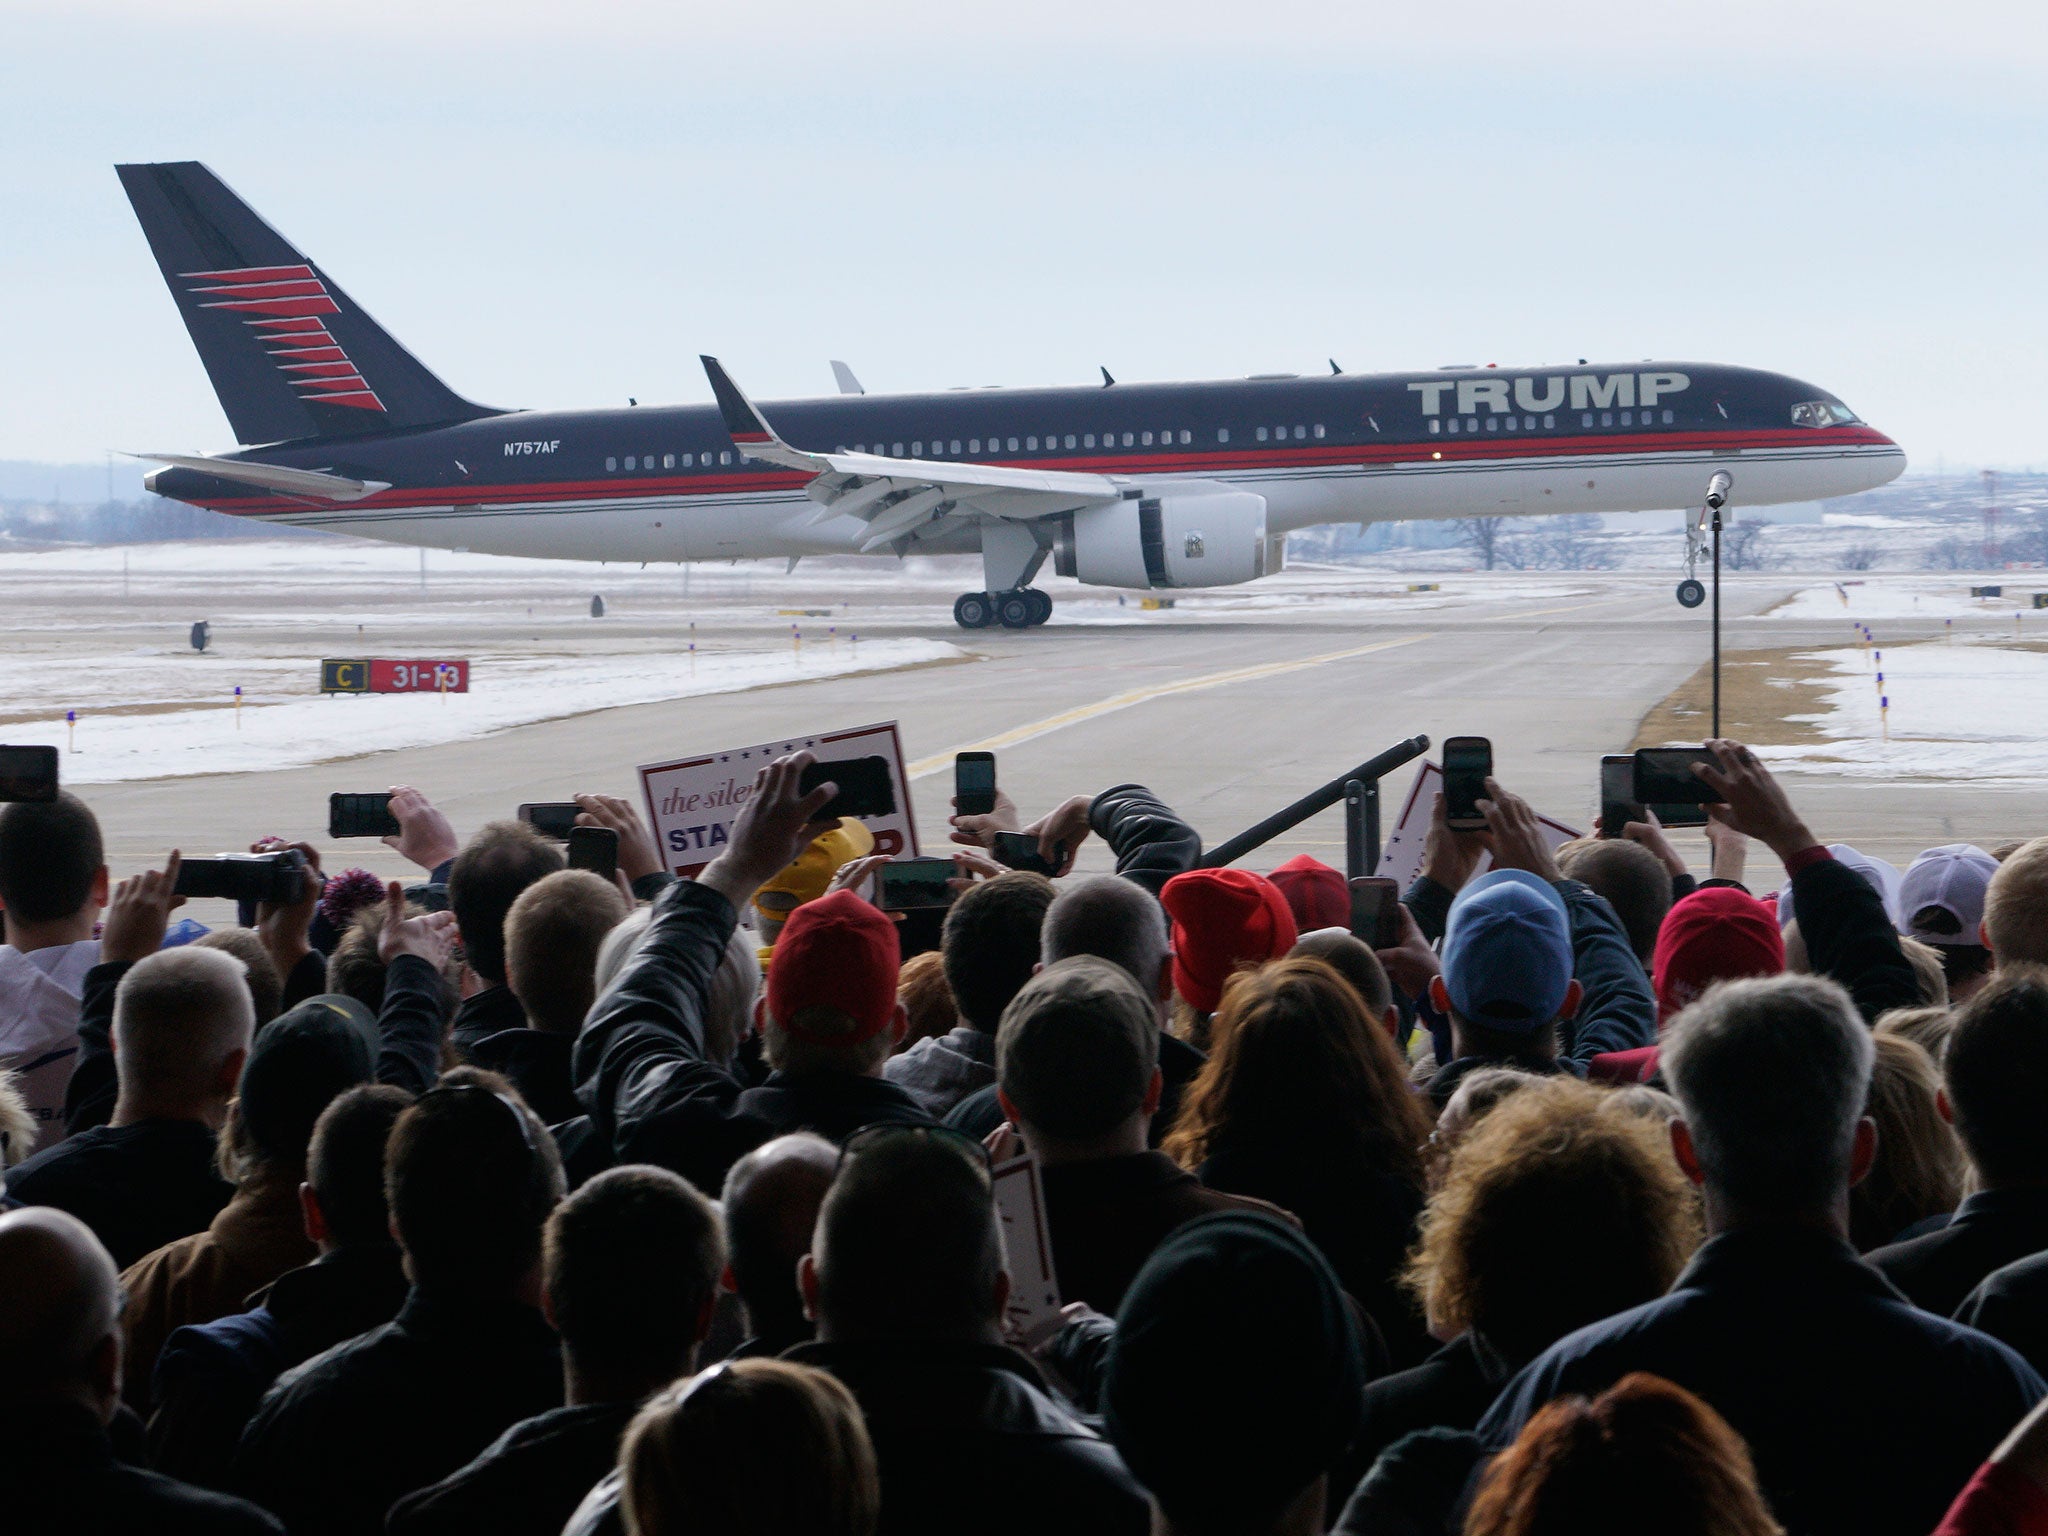 Donald Trump's plane in Iowa at the weekend